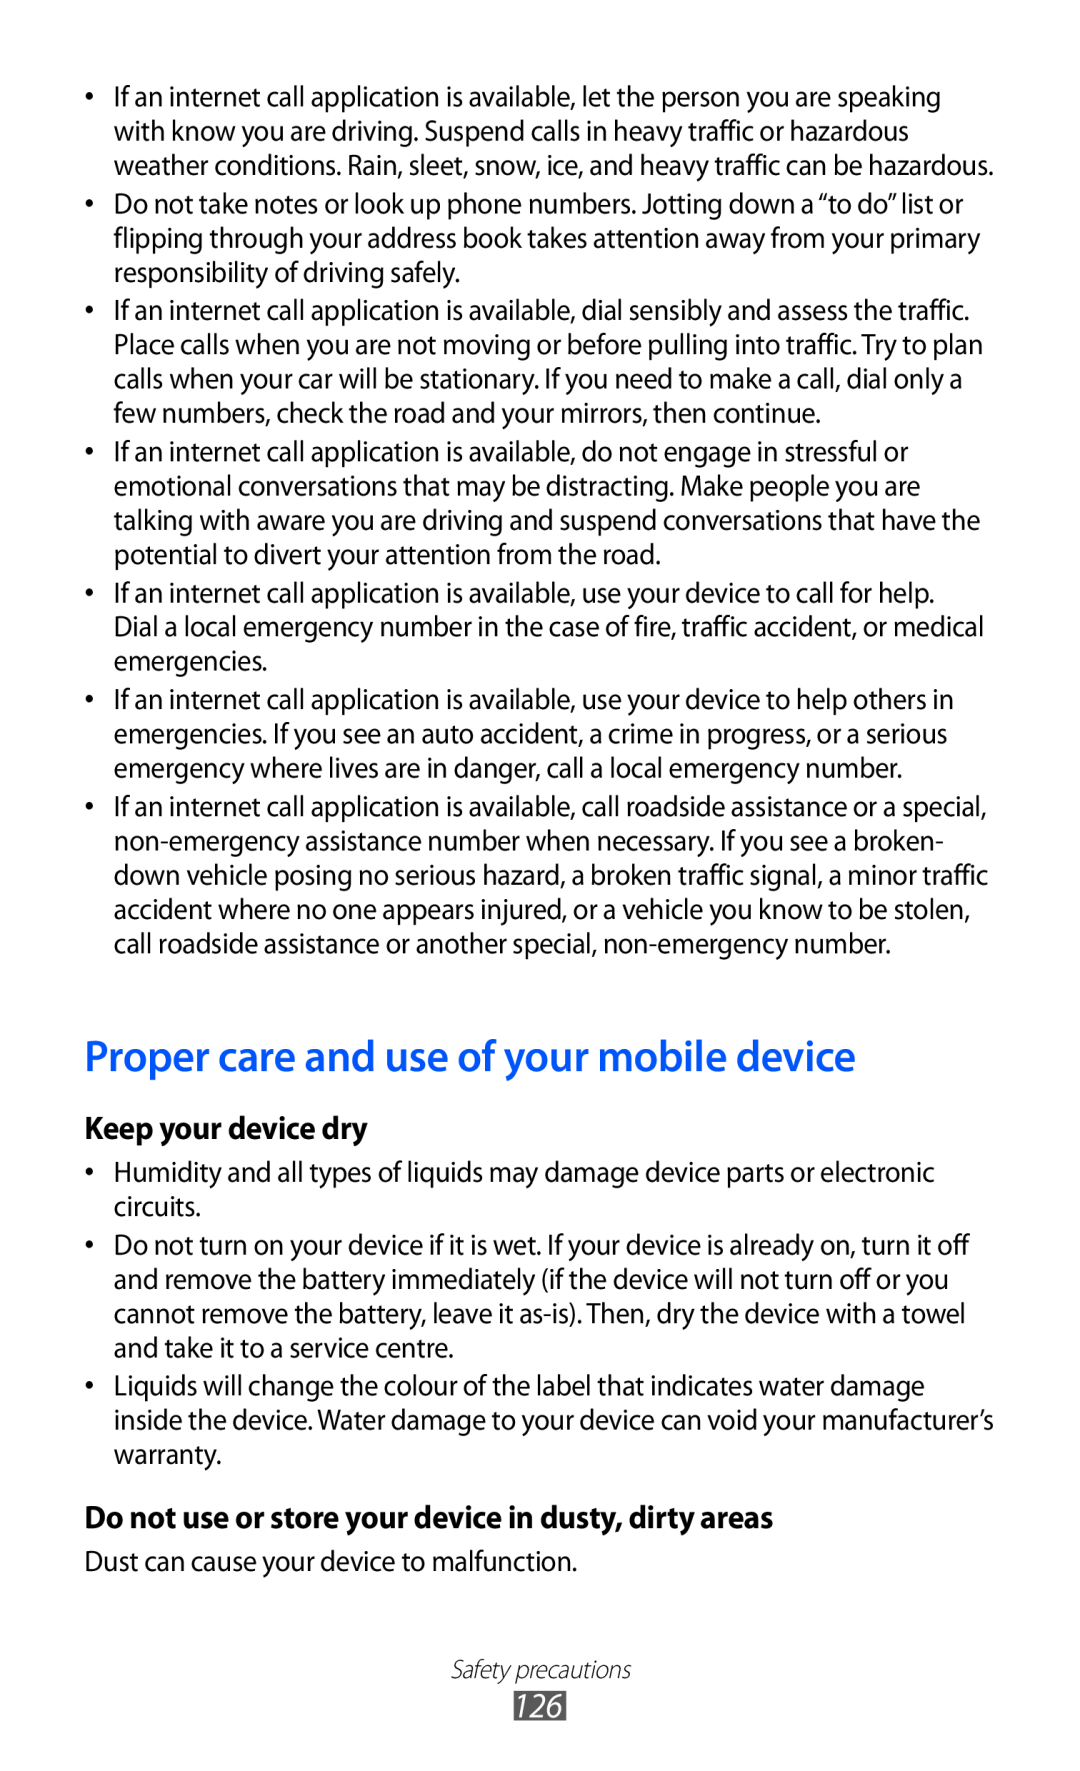 Samsung GT-P7320FKAFTM, GT-P7320UWAVD2, GT-P7320FKAOPT manual Proper care and use of your mobile device, Keep your device dry 